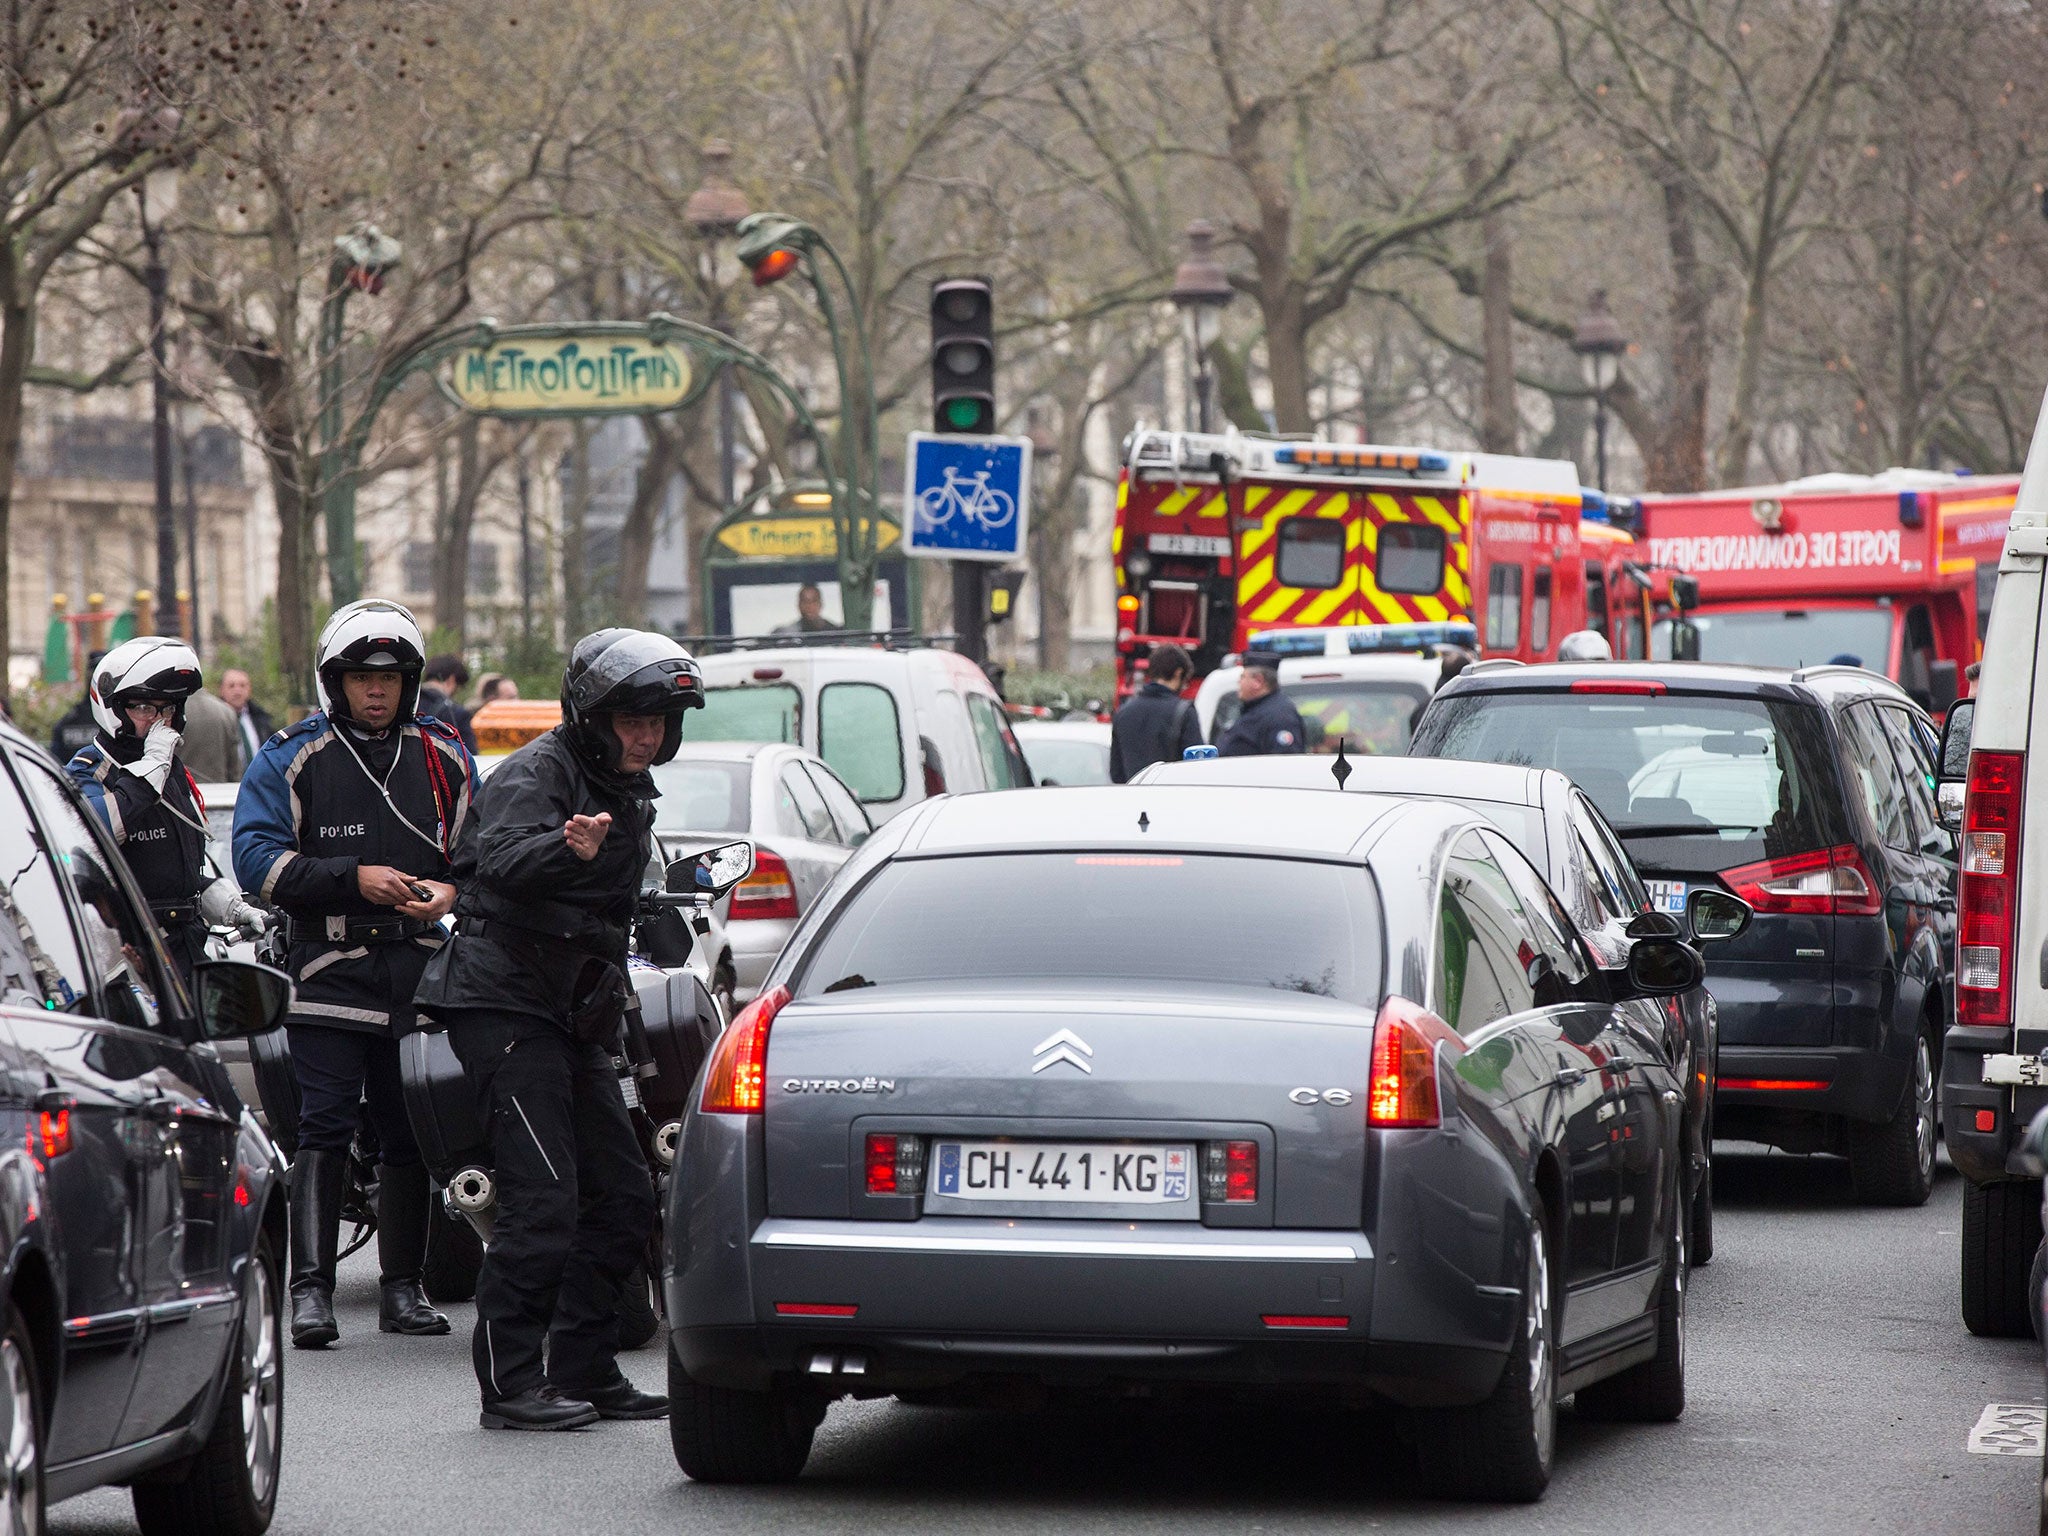 Police block the roads next to the 'Charly Hebdo' headquarter where a shoutout occurred in Paris